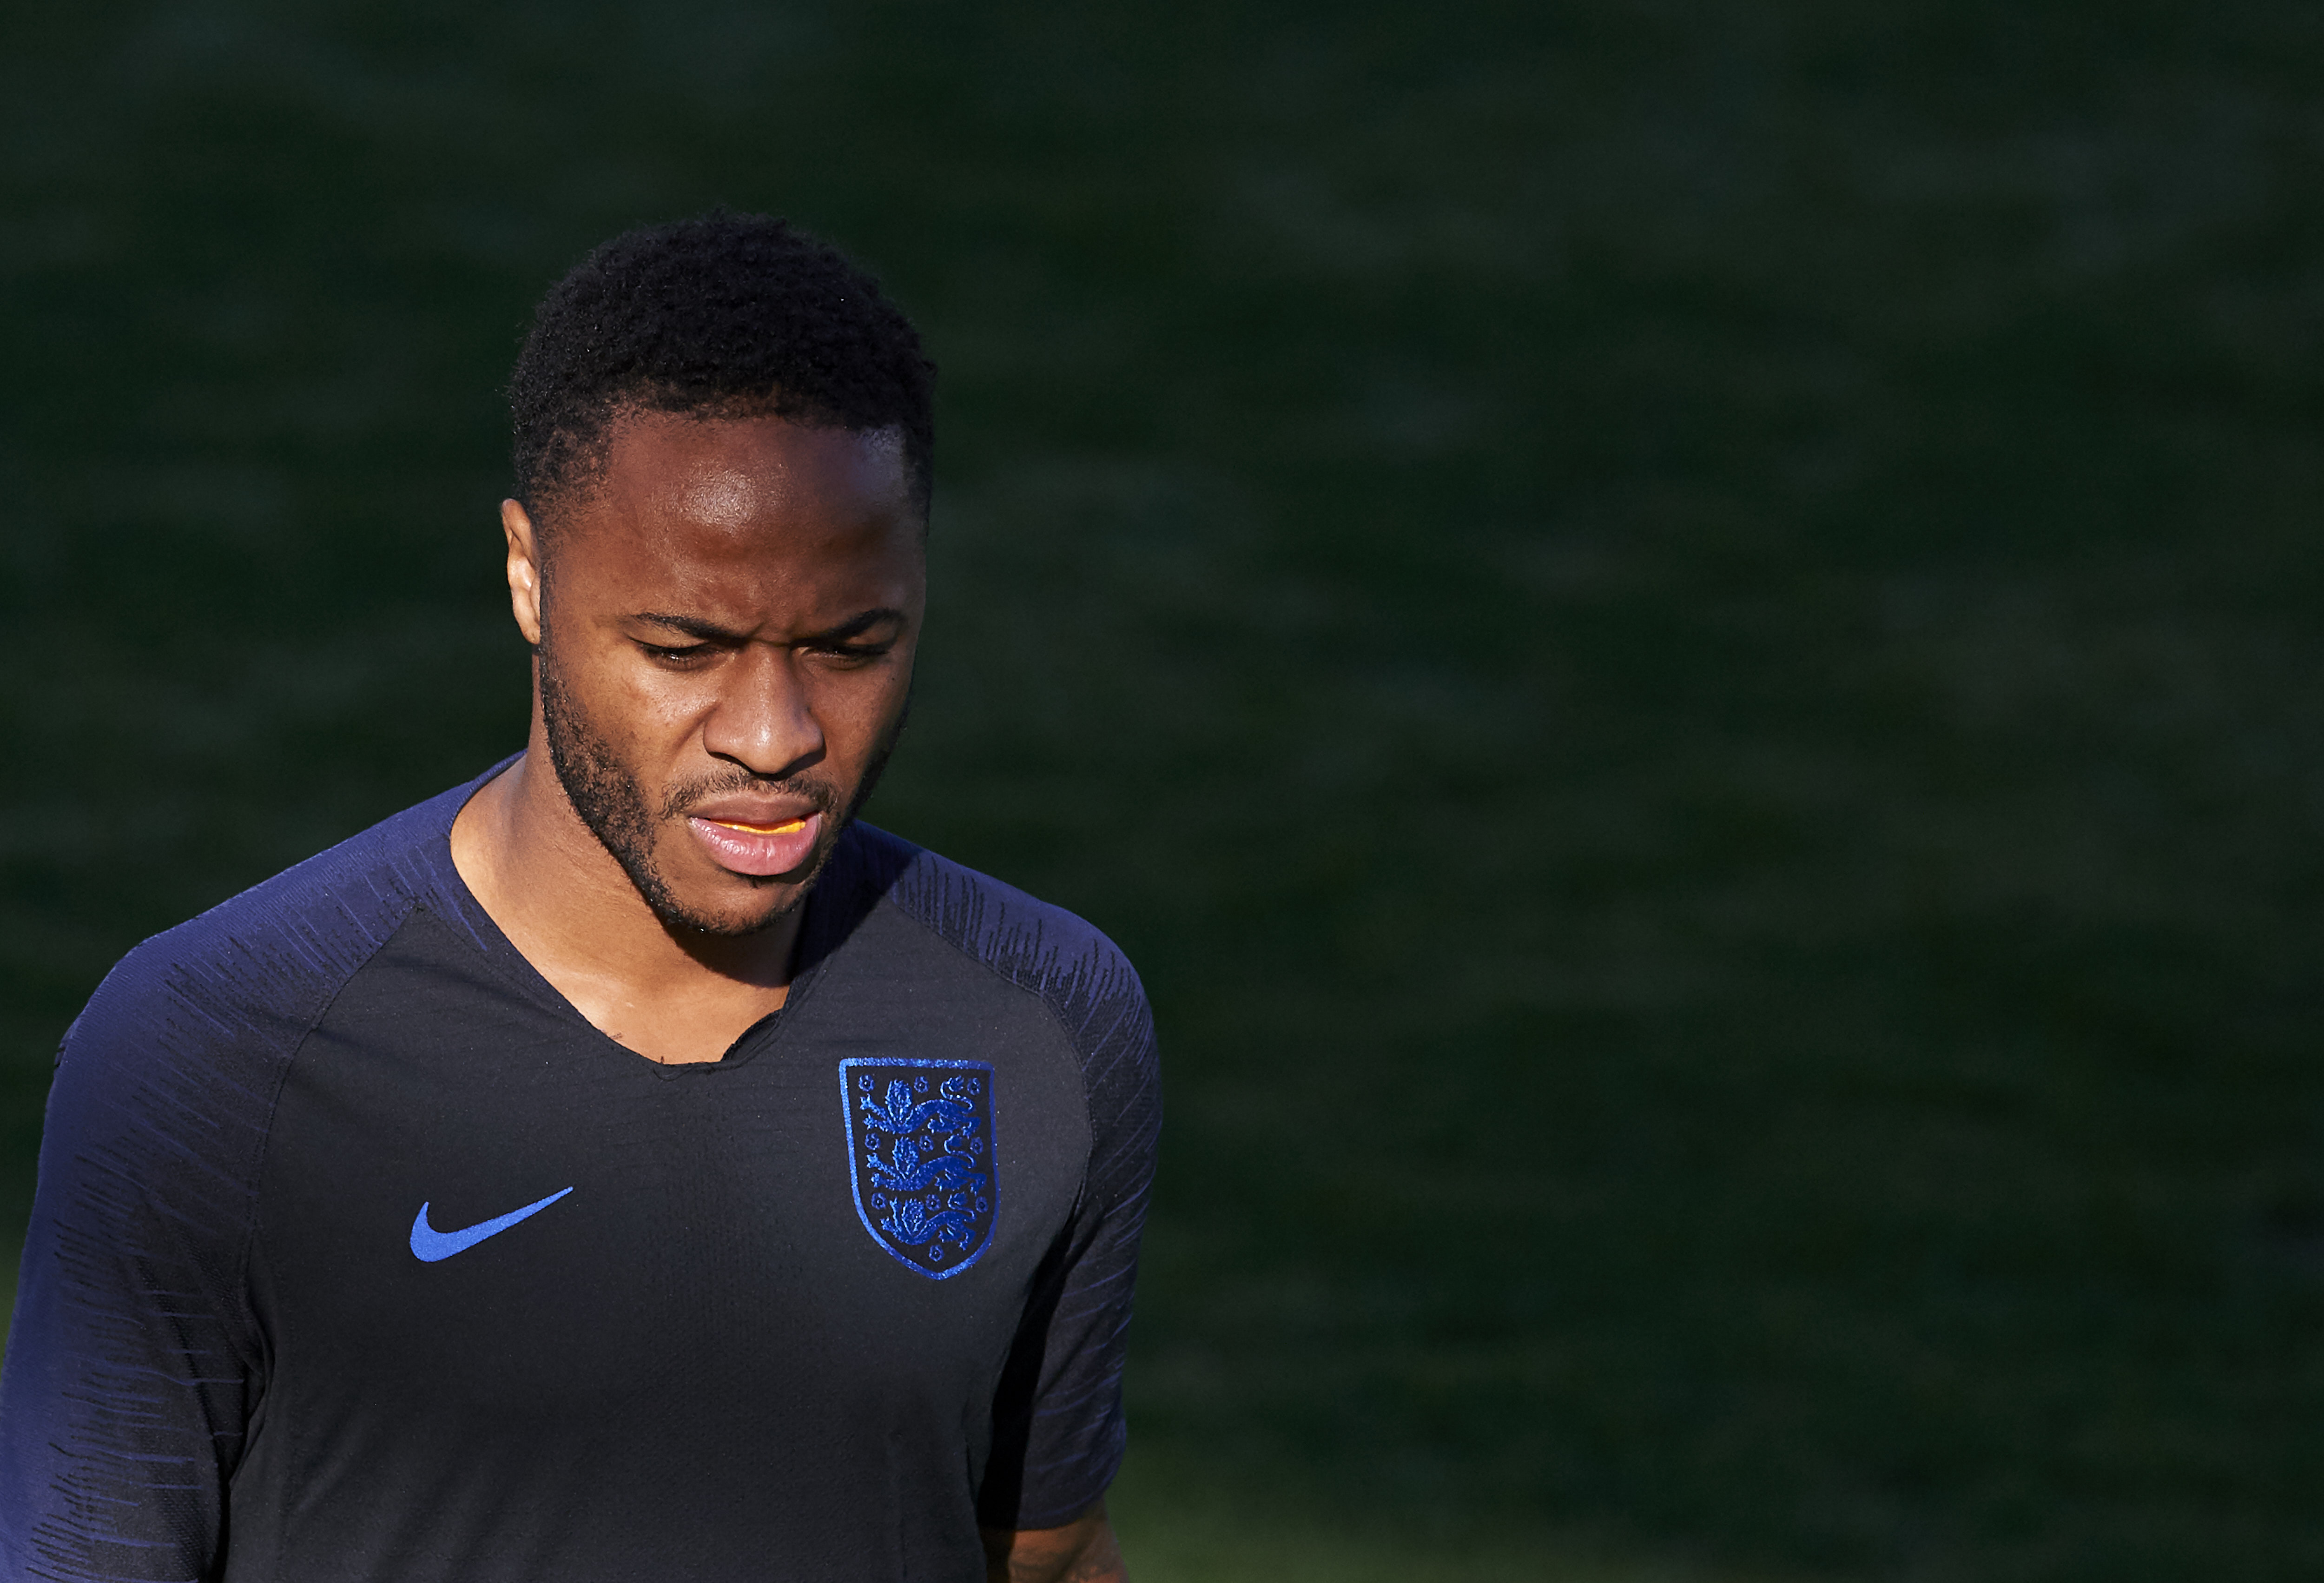 SEVILLE, SPAIN - OCTOBER 14: Raheem Sterling of England looks on during an England training session ahead of their UEFA Nations League match against Spain at Estadio Benito Villamarin on October 14, 2018 in Seville, Spain.  (Photo by Aitor Alcalde/Getty Images)